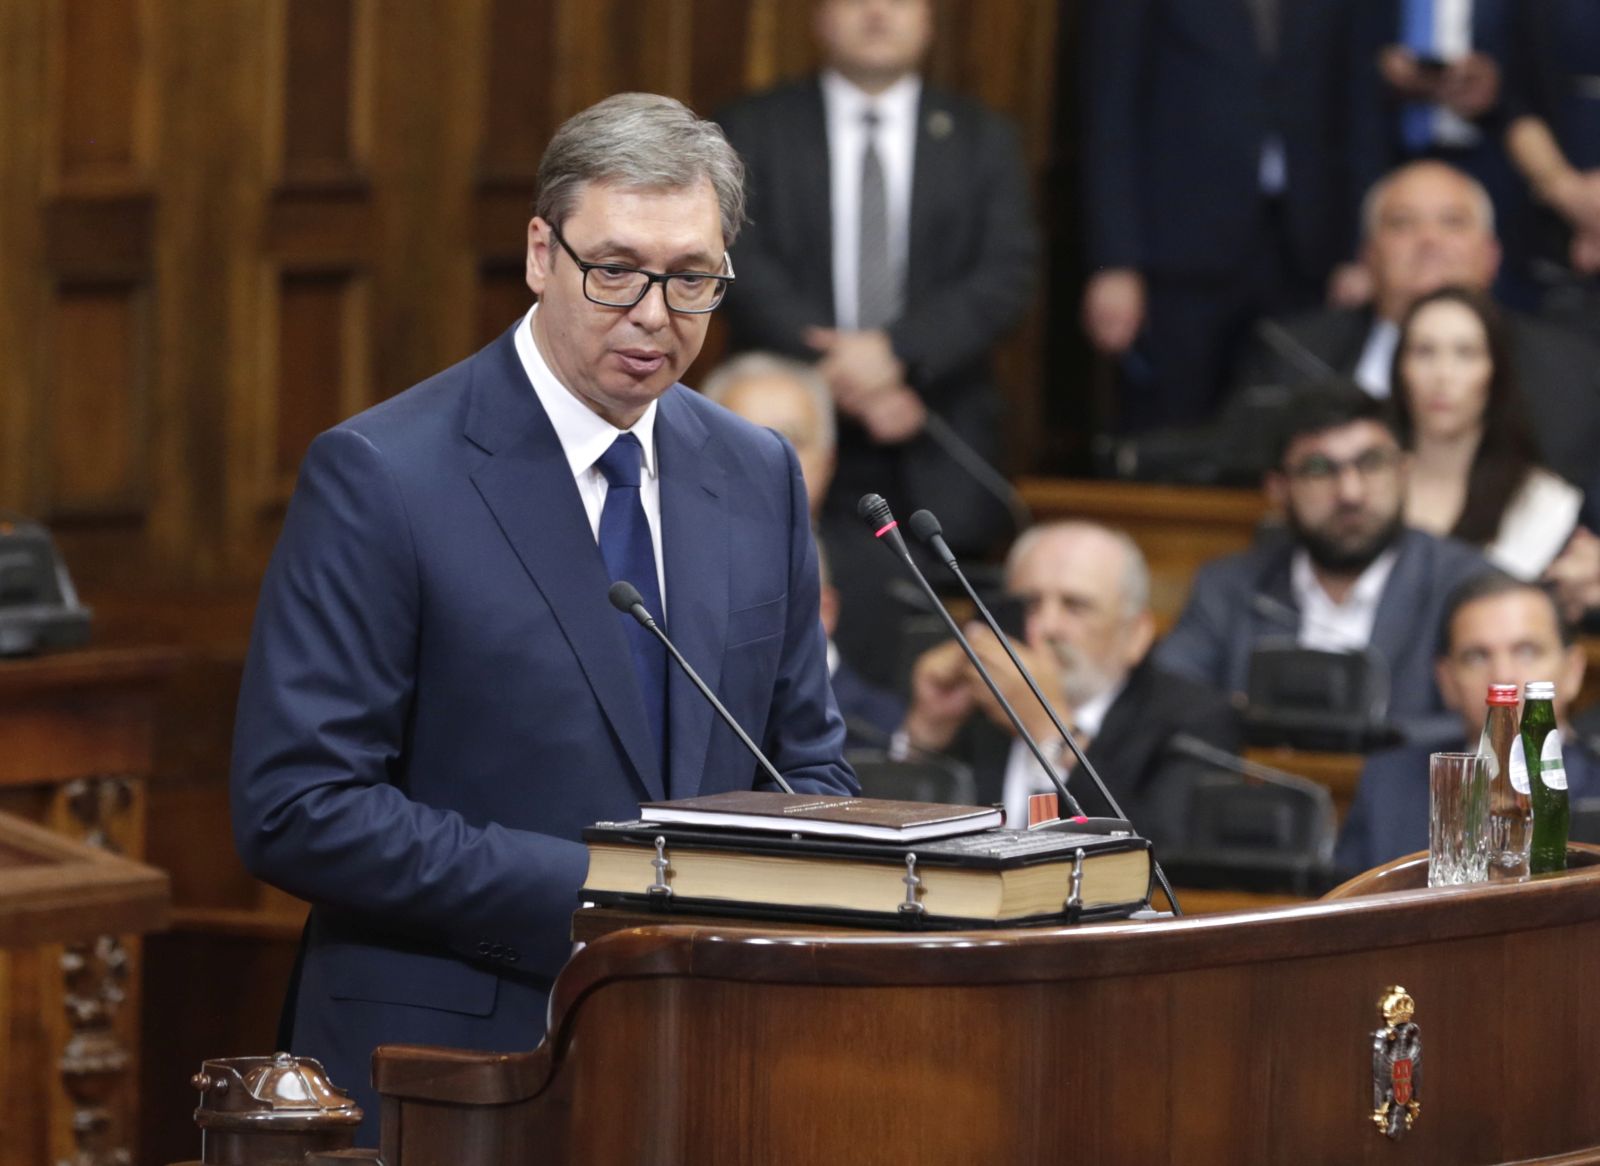 epa09987492 President of Serbia Aleksandar Vucic takes the oath as he is sworn in as President during a ceremony in Belgrade, Serbia, 31 May 2022. Vucic had won 58.59 per cent of votes cast in the elections held on 03 April 2022, securing a second five-year term as President.  EPA/ANDREJ CUKIC